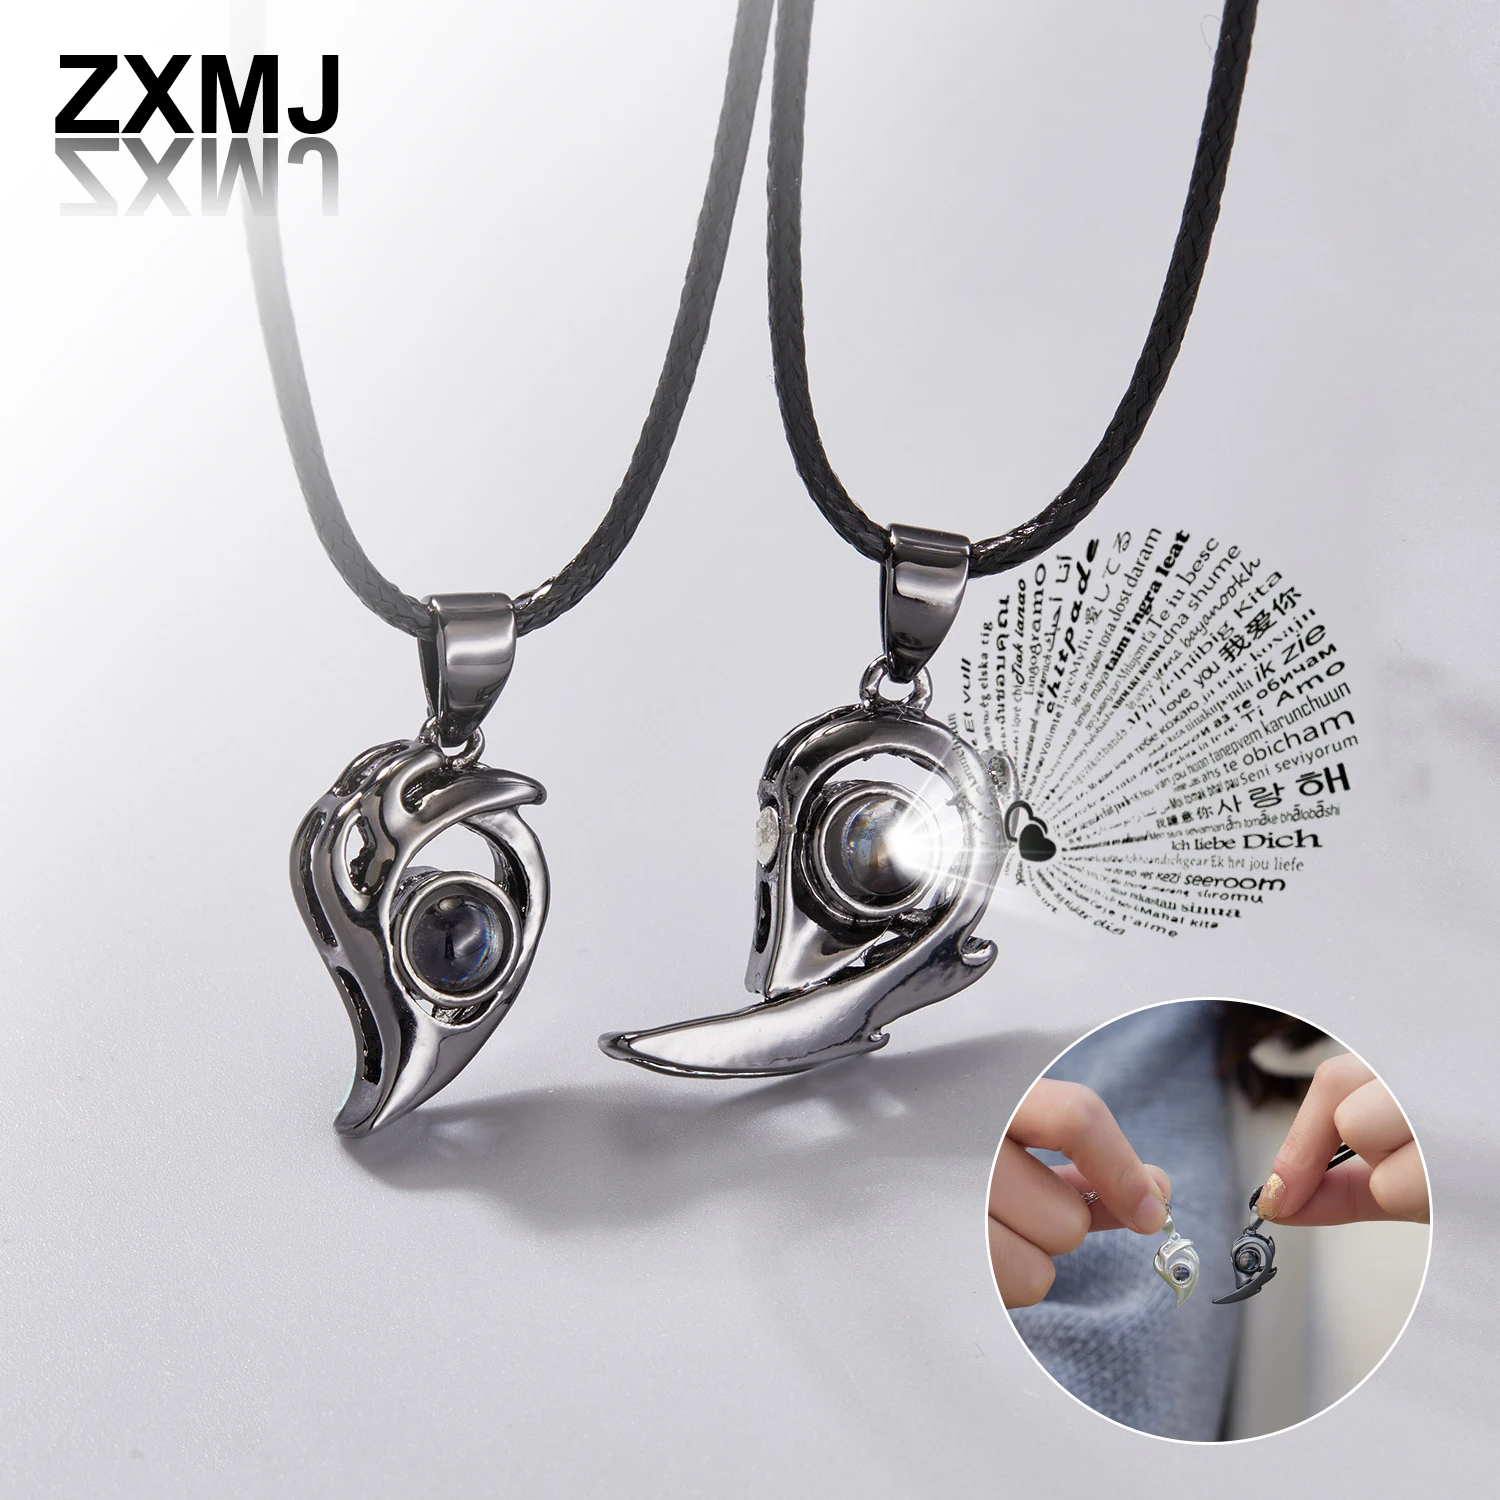 

ZXMJ Hot Sale Couple Necklace Love Magnetic Attraction Necklaces for Women Projection 100 Languages of "I Love You" Necklace Set